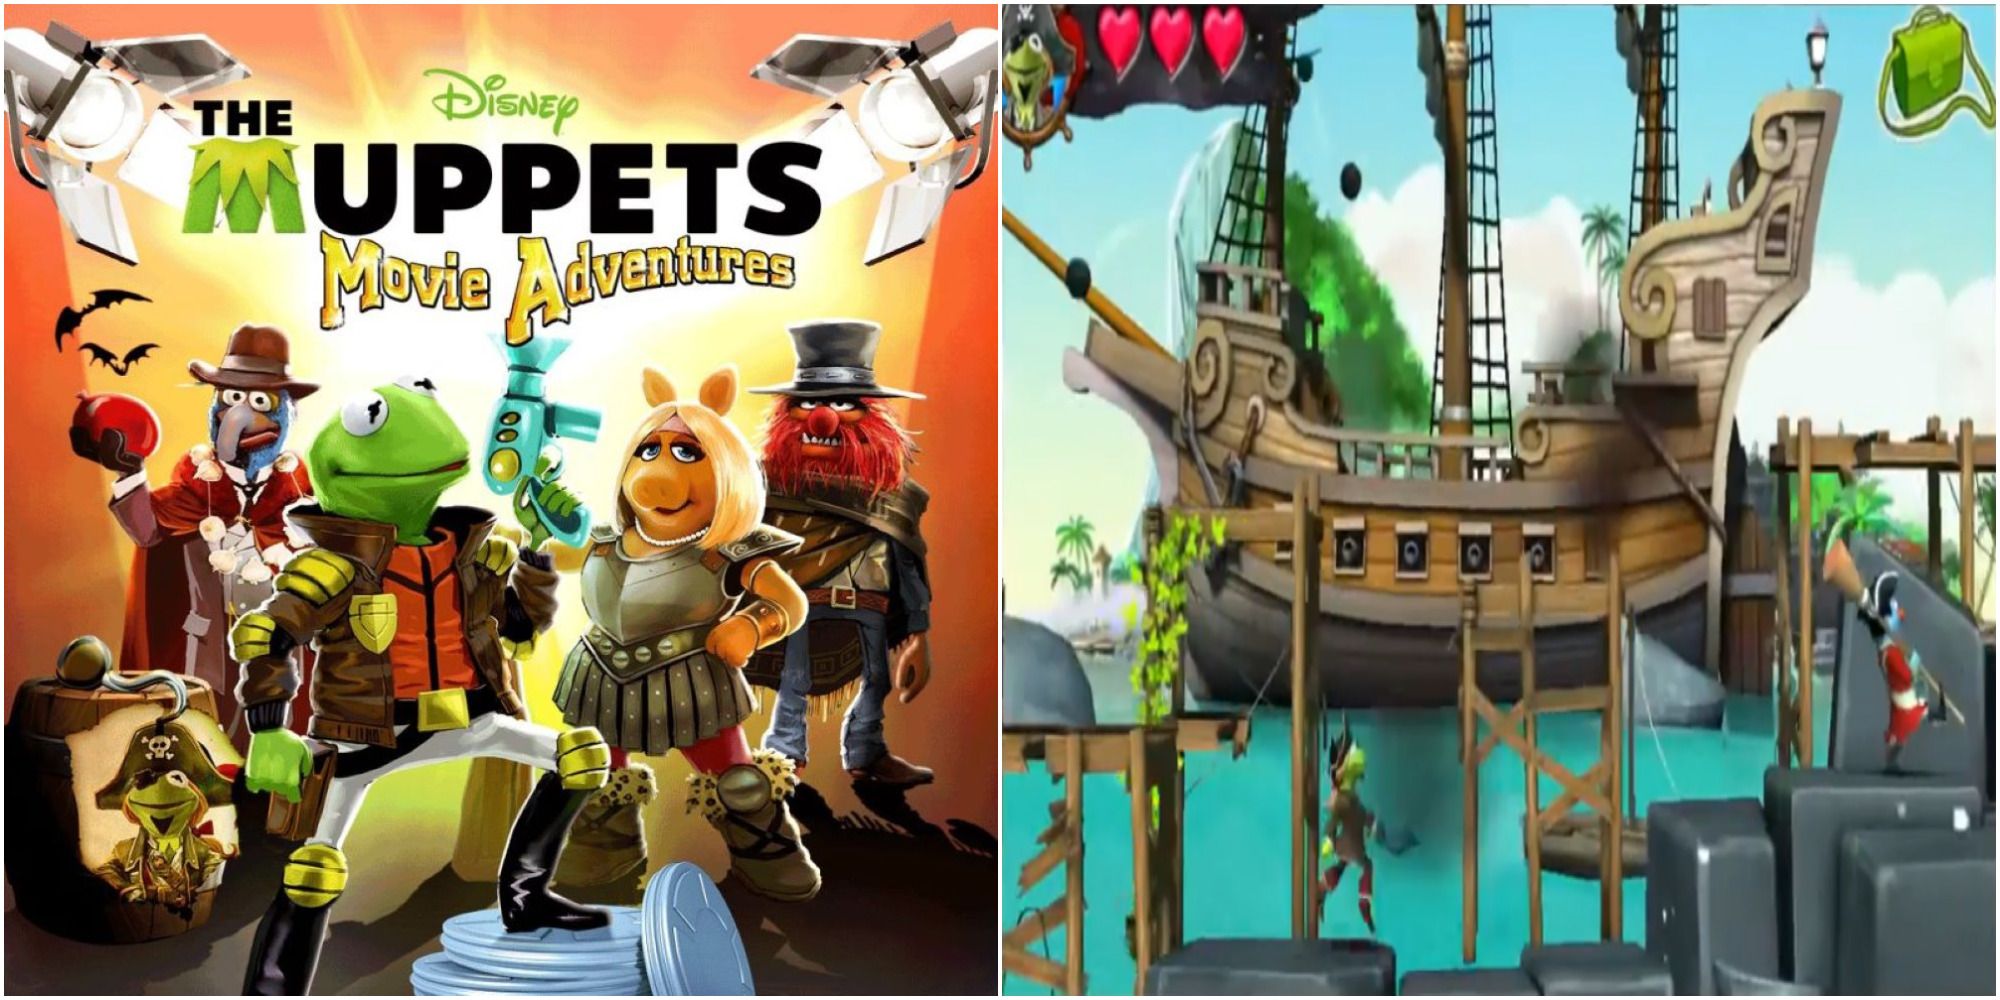 Split image Muppets Movie Adventures Cover for PS Vita featuring cast and Kermit pirate level gameplay